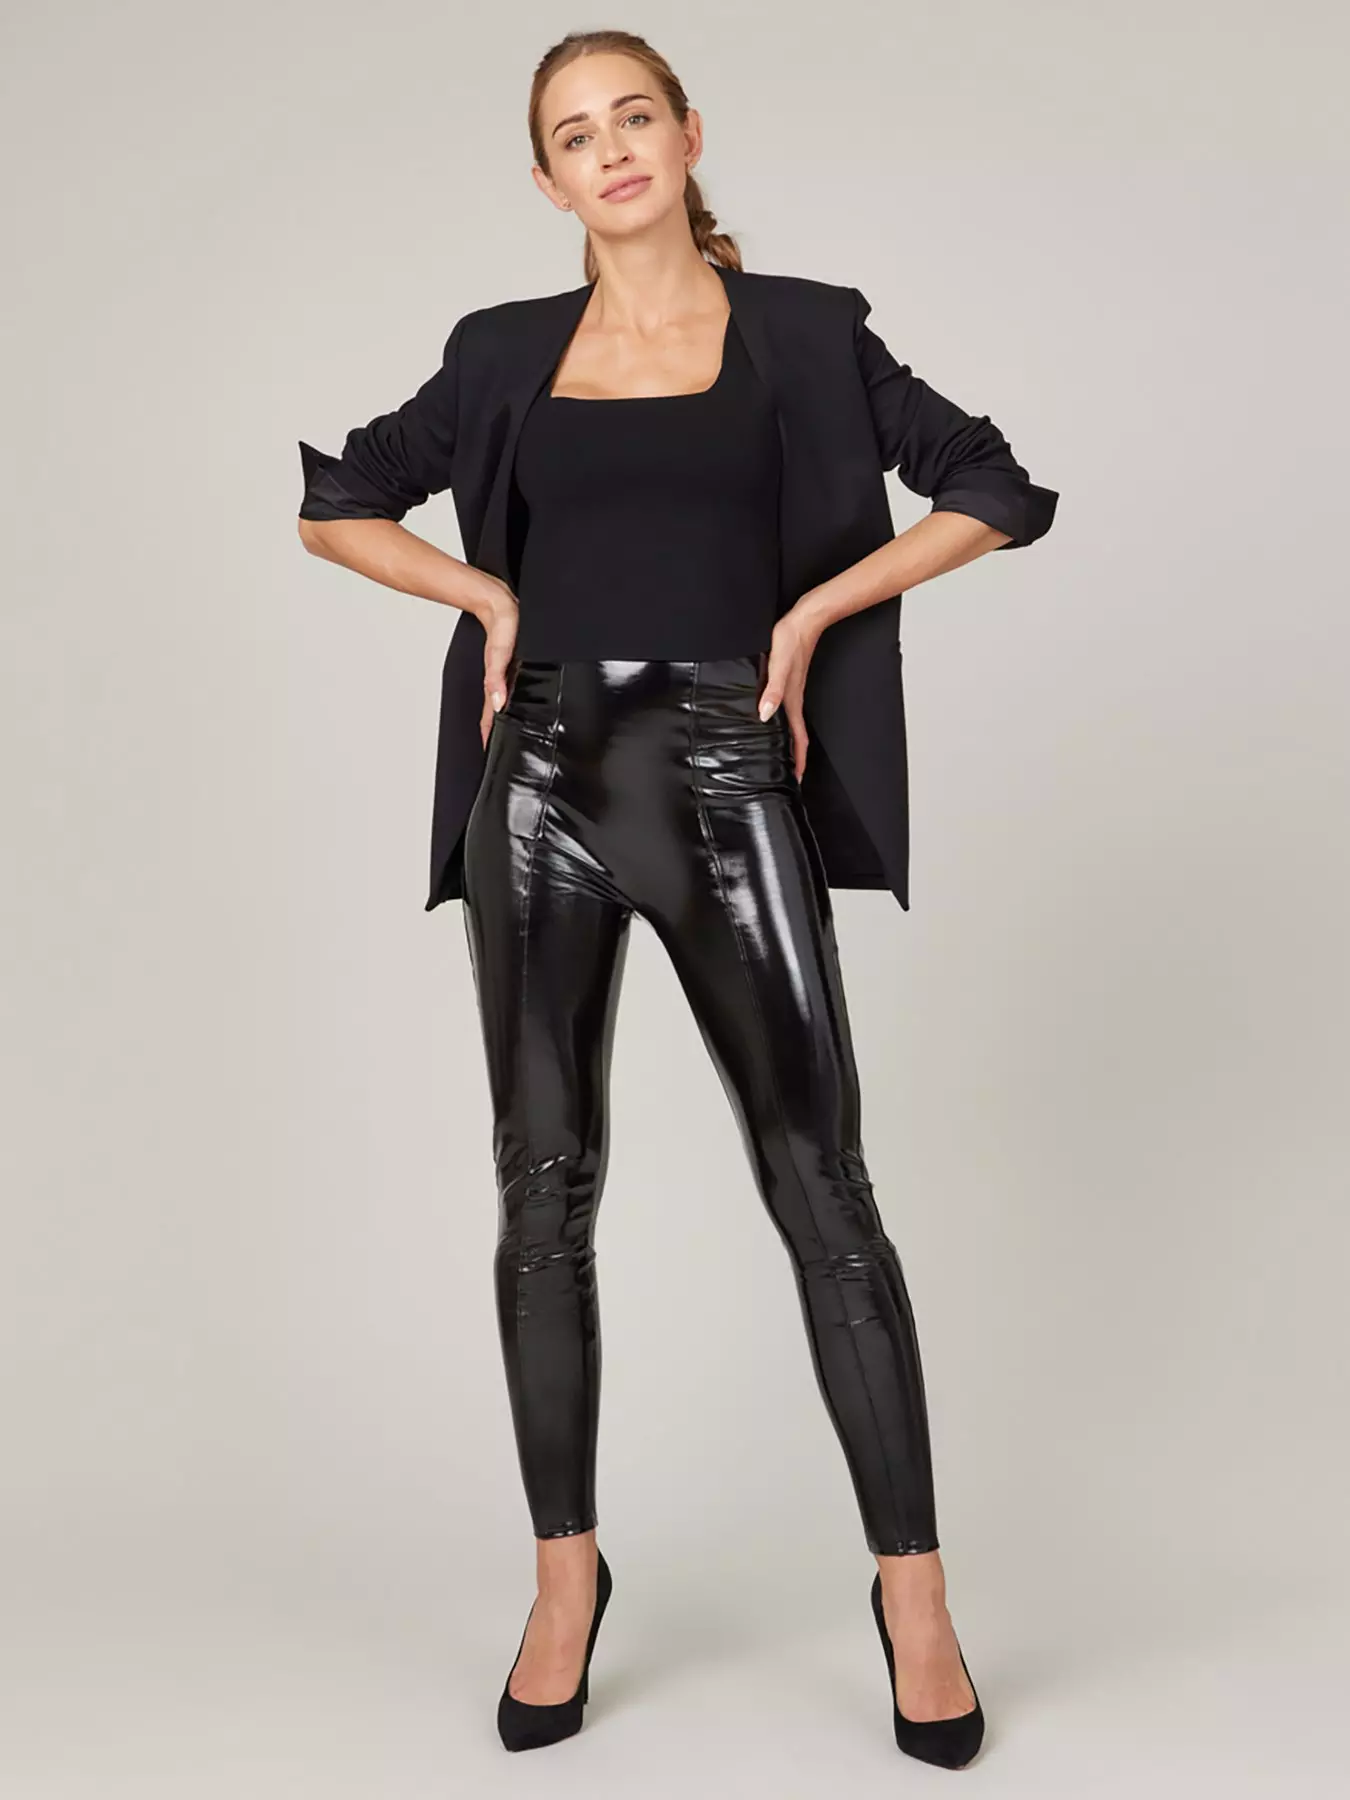 SPANX, Pants & Jumpsuits, Spanx Faux Leather Leggings Black Size Small  Petite New 540